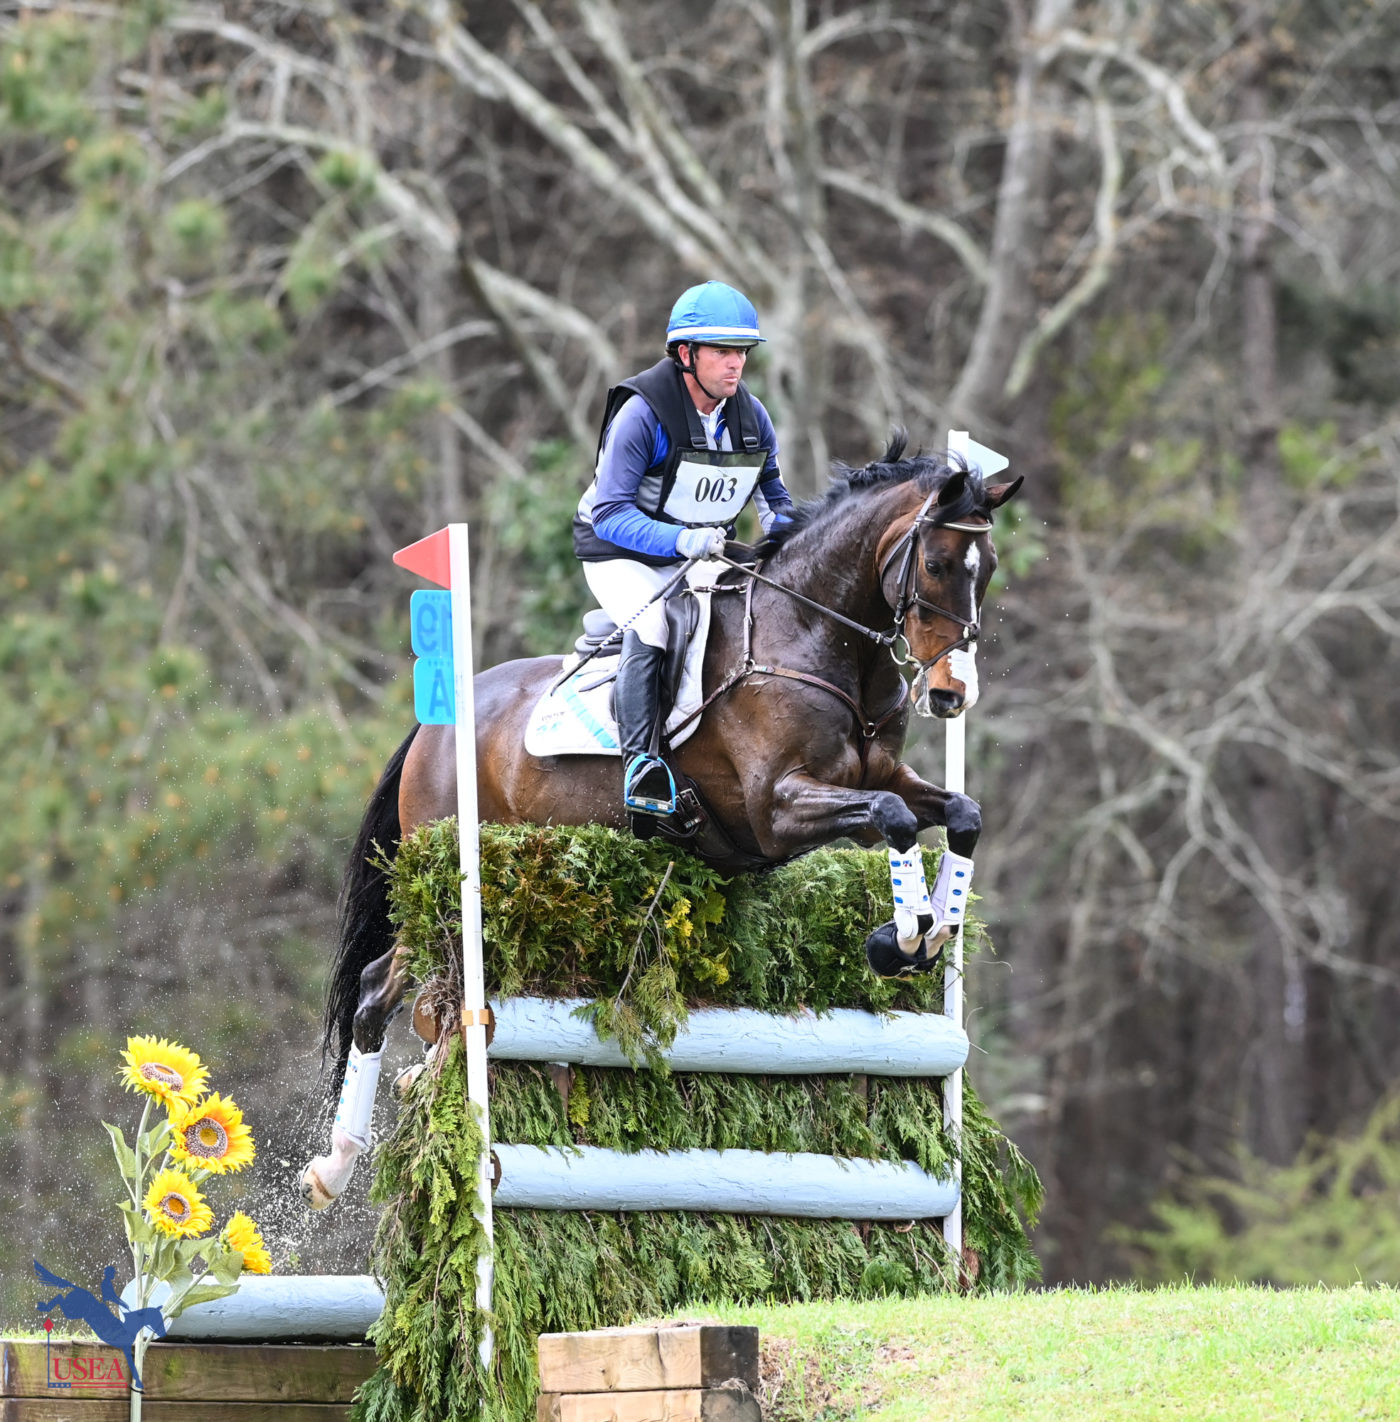 Will Faudree added another top 10 finish to his resume this weekend, landing in eighth place with Mama's Magic Way. USEA/Lindsay Berreth photo